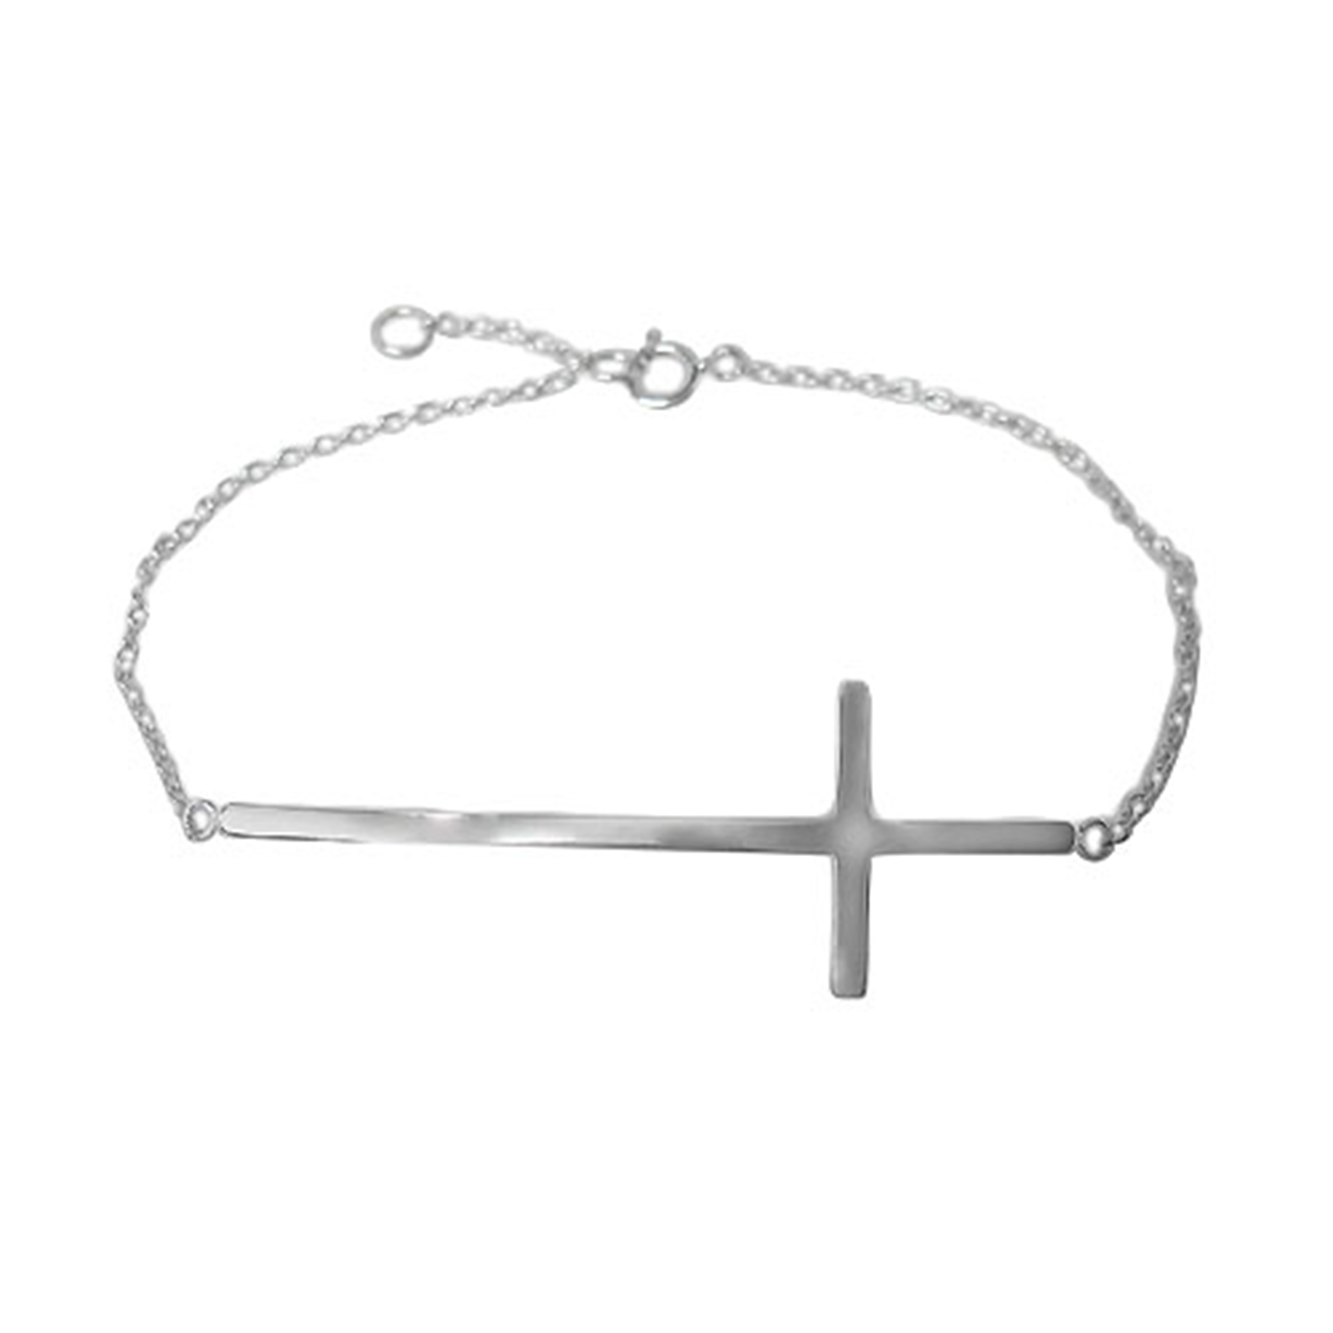 Cross Bracelet, Sterling Silver with Rhodium, Smooth 6.5 inch